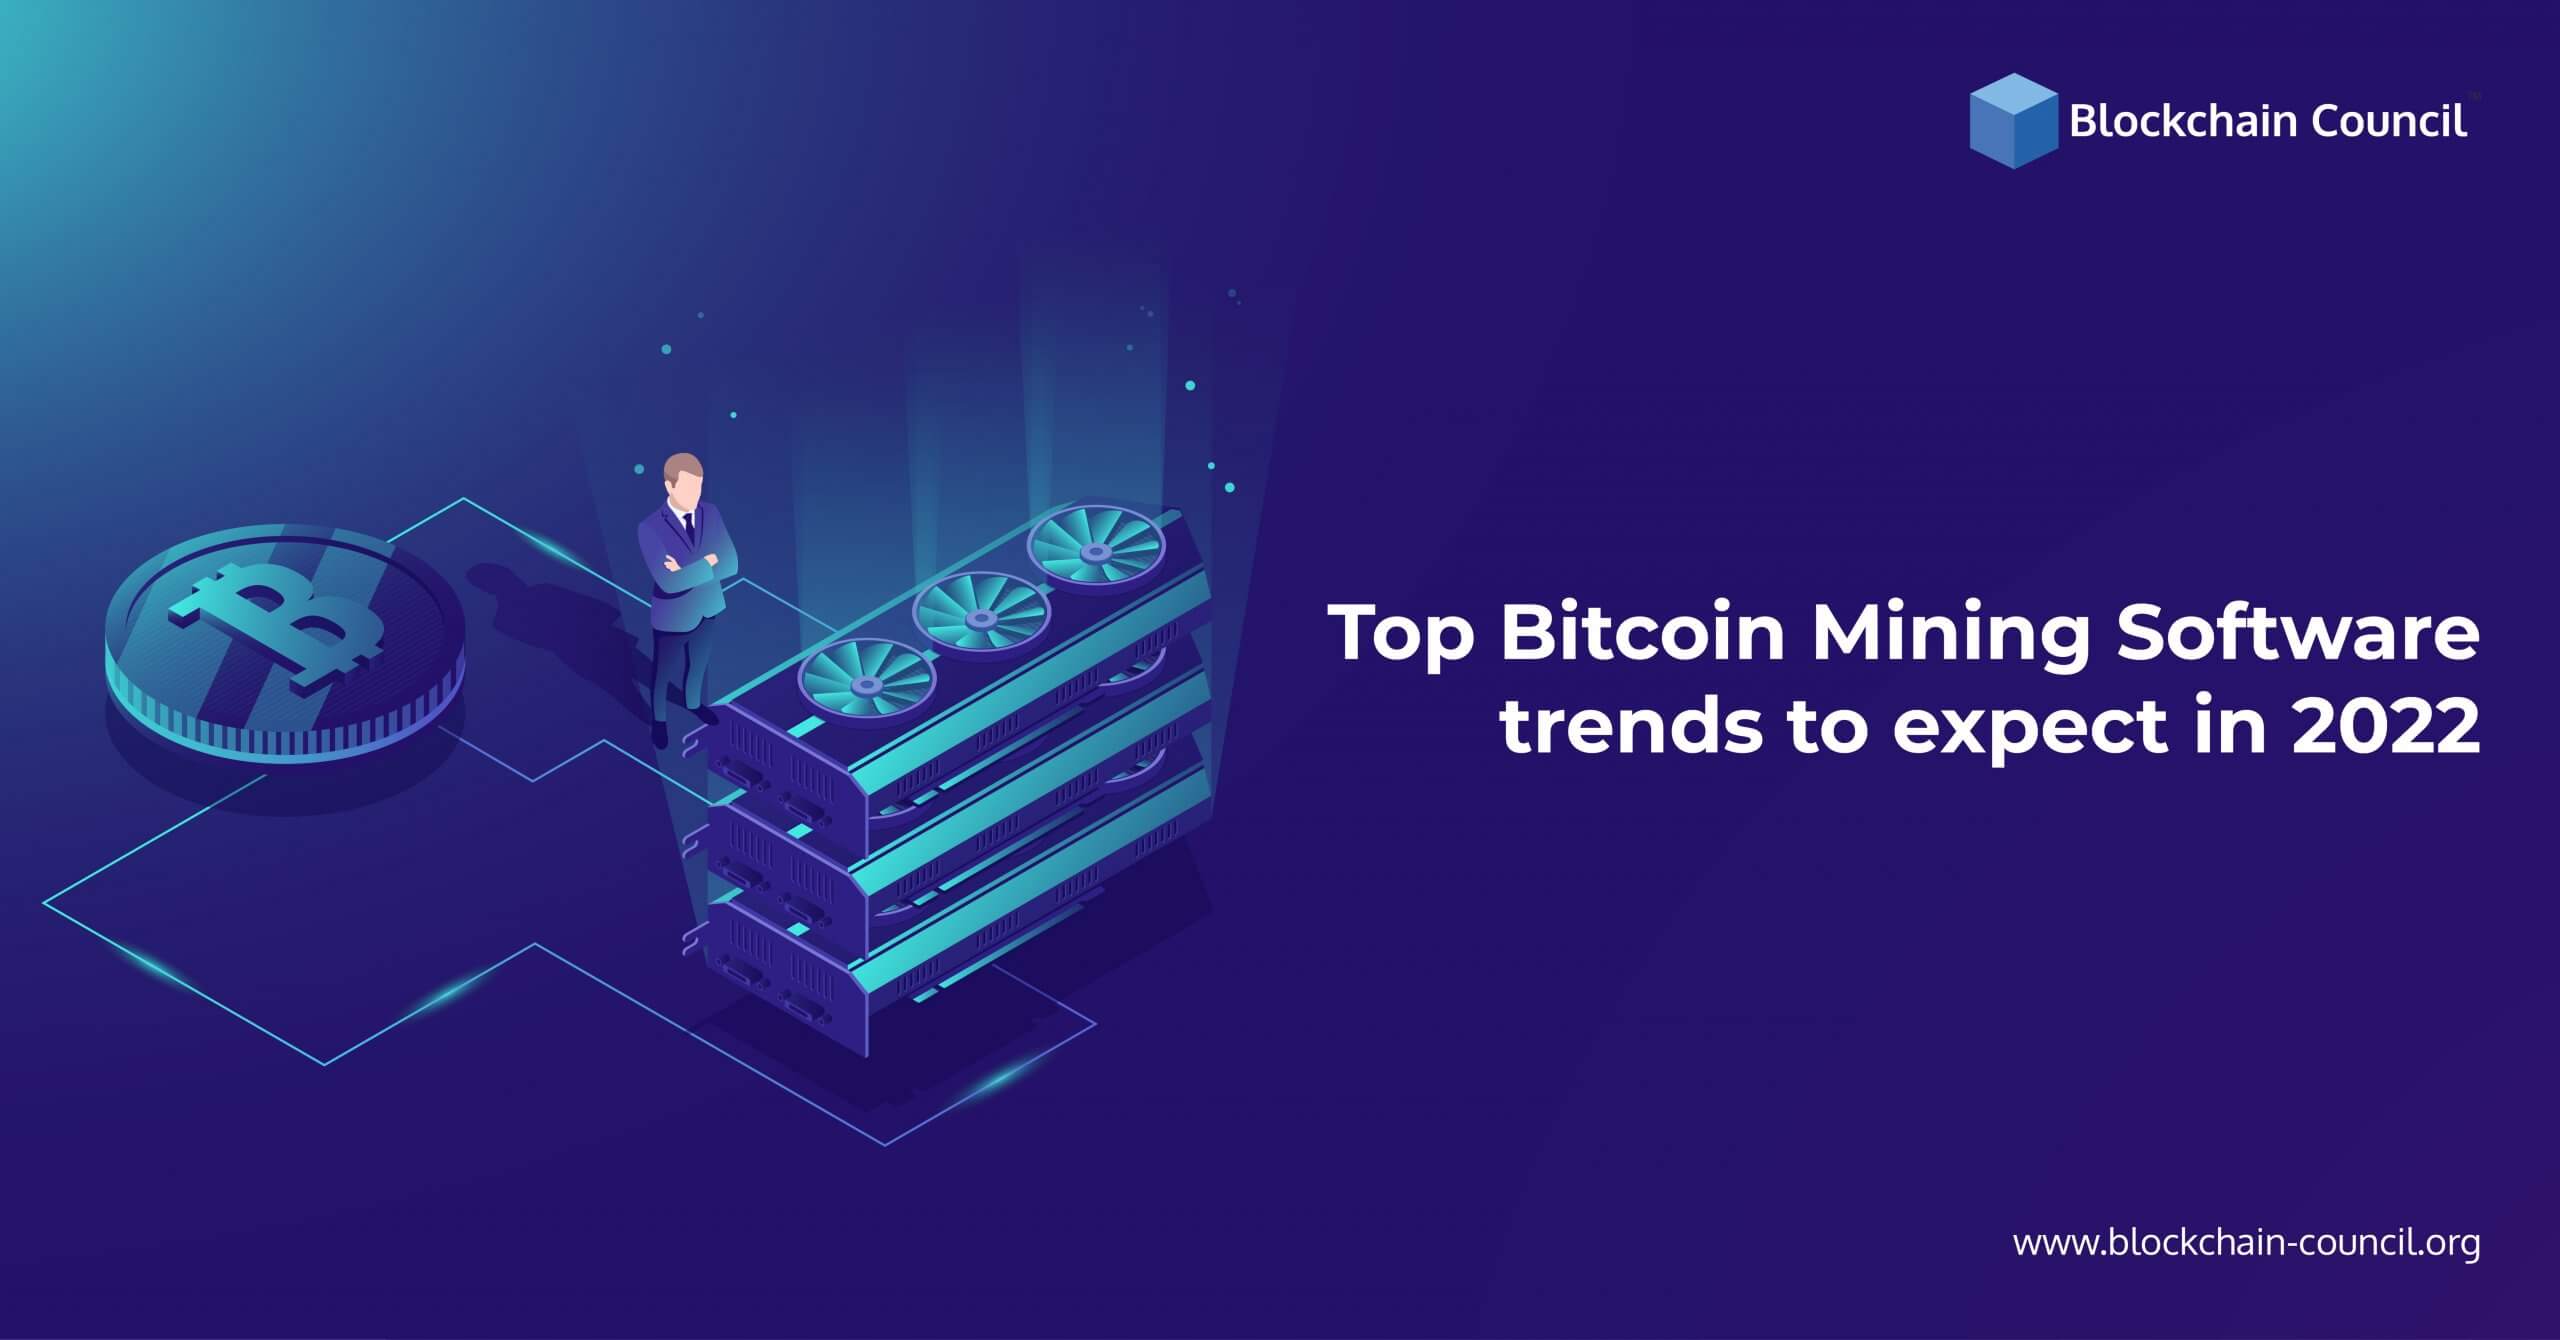 Top Bitcoin Mining Software trends to expect in 2022